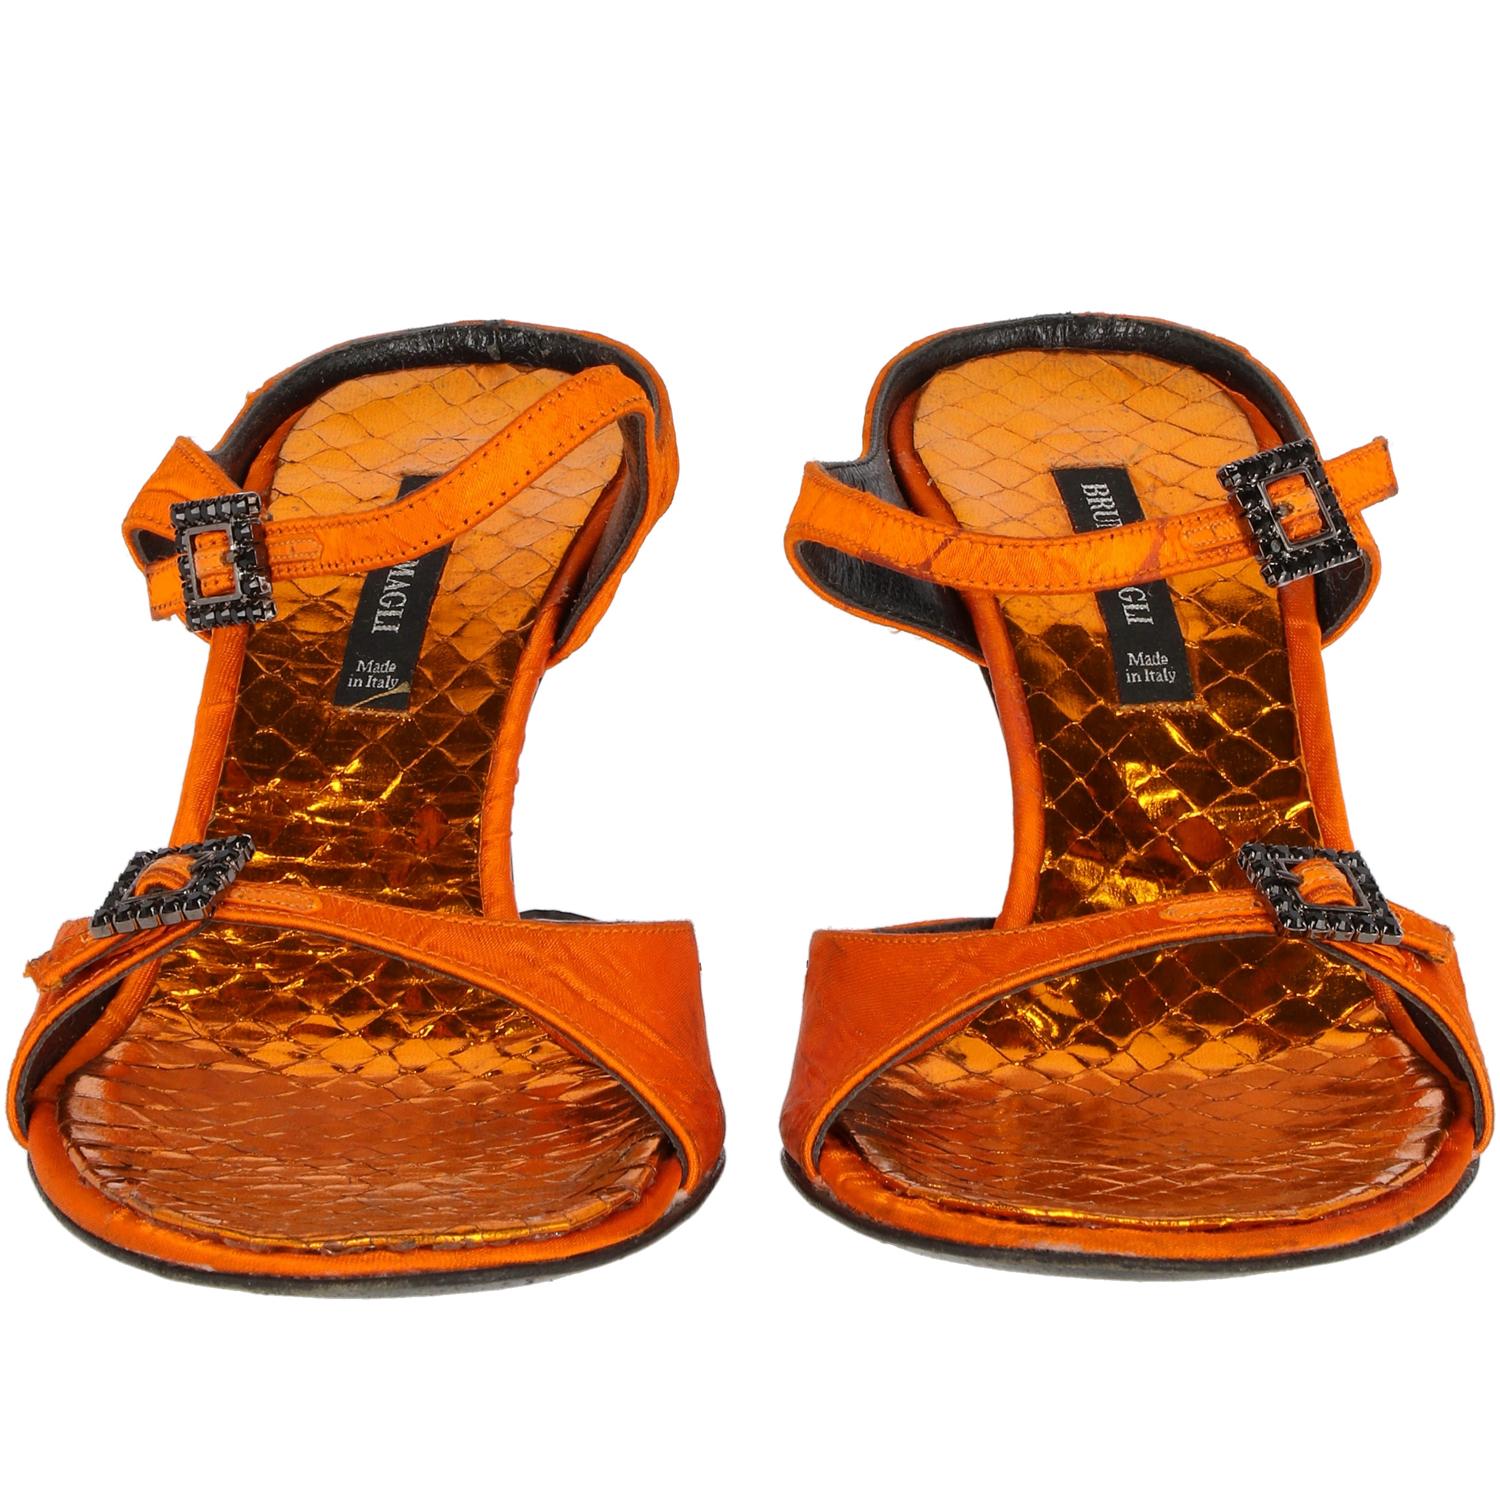 90s Bruno Magli orange sandals. Two foot straps and black strass embellished buckles. Metallic orange python insole and black heel. 

The item is vintage and shows some signs of use, as shown in the pictures.

Years: 90s

Size: 37 EU

Heels height: